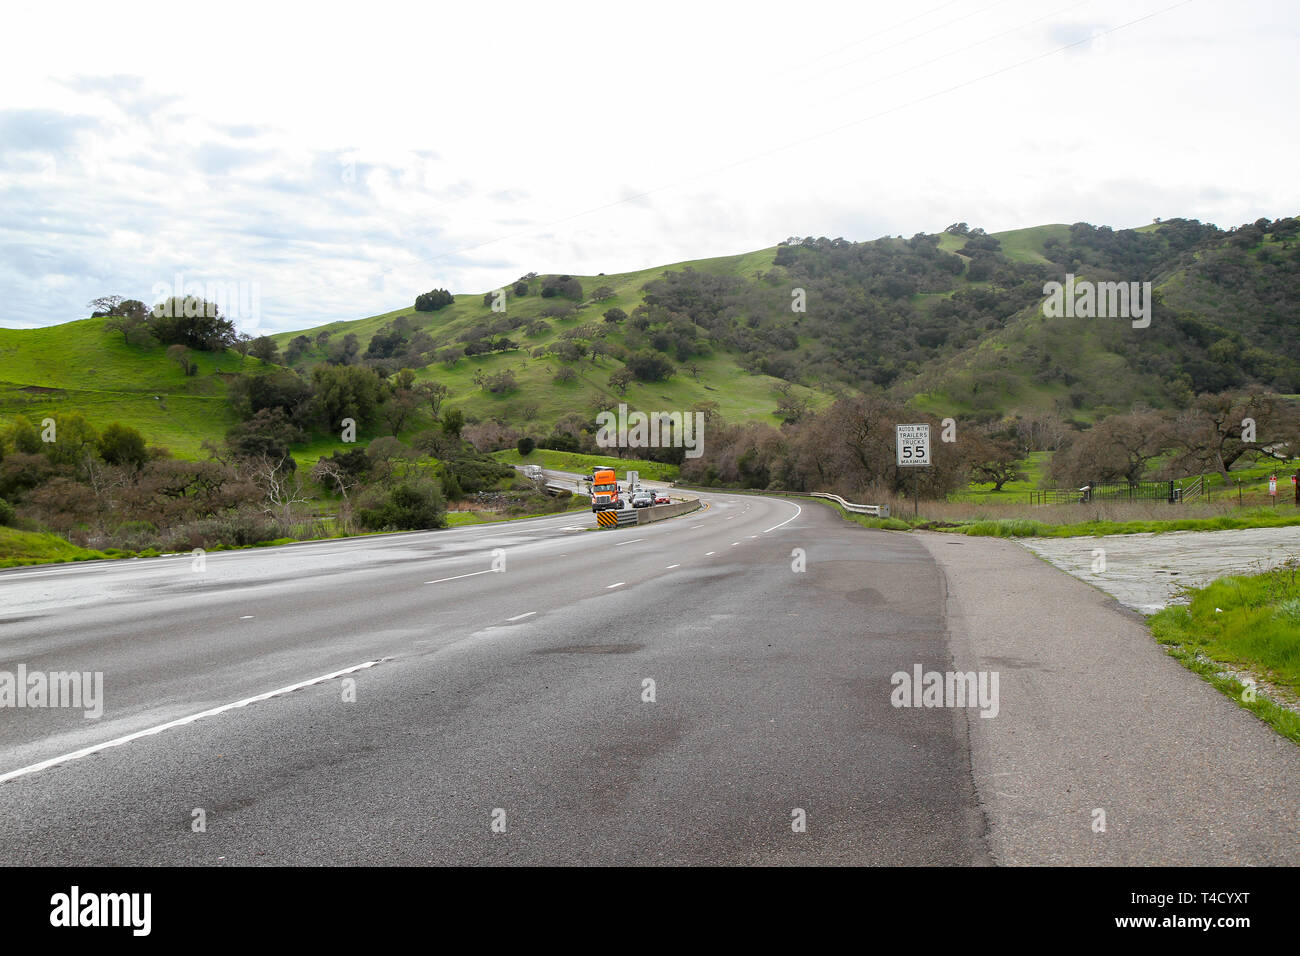 California State Route 152, also know as the Pacheco Pass Highway, Gilroy, California, United States Stock Photo